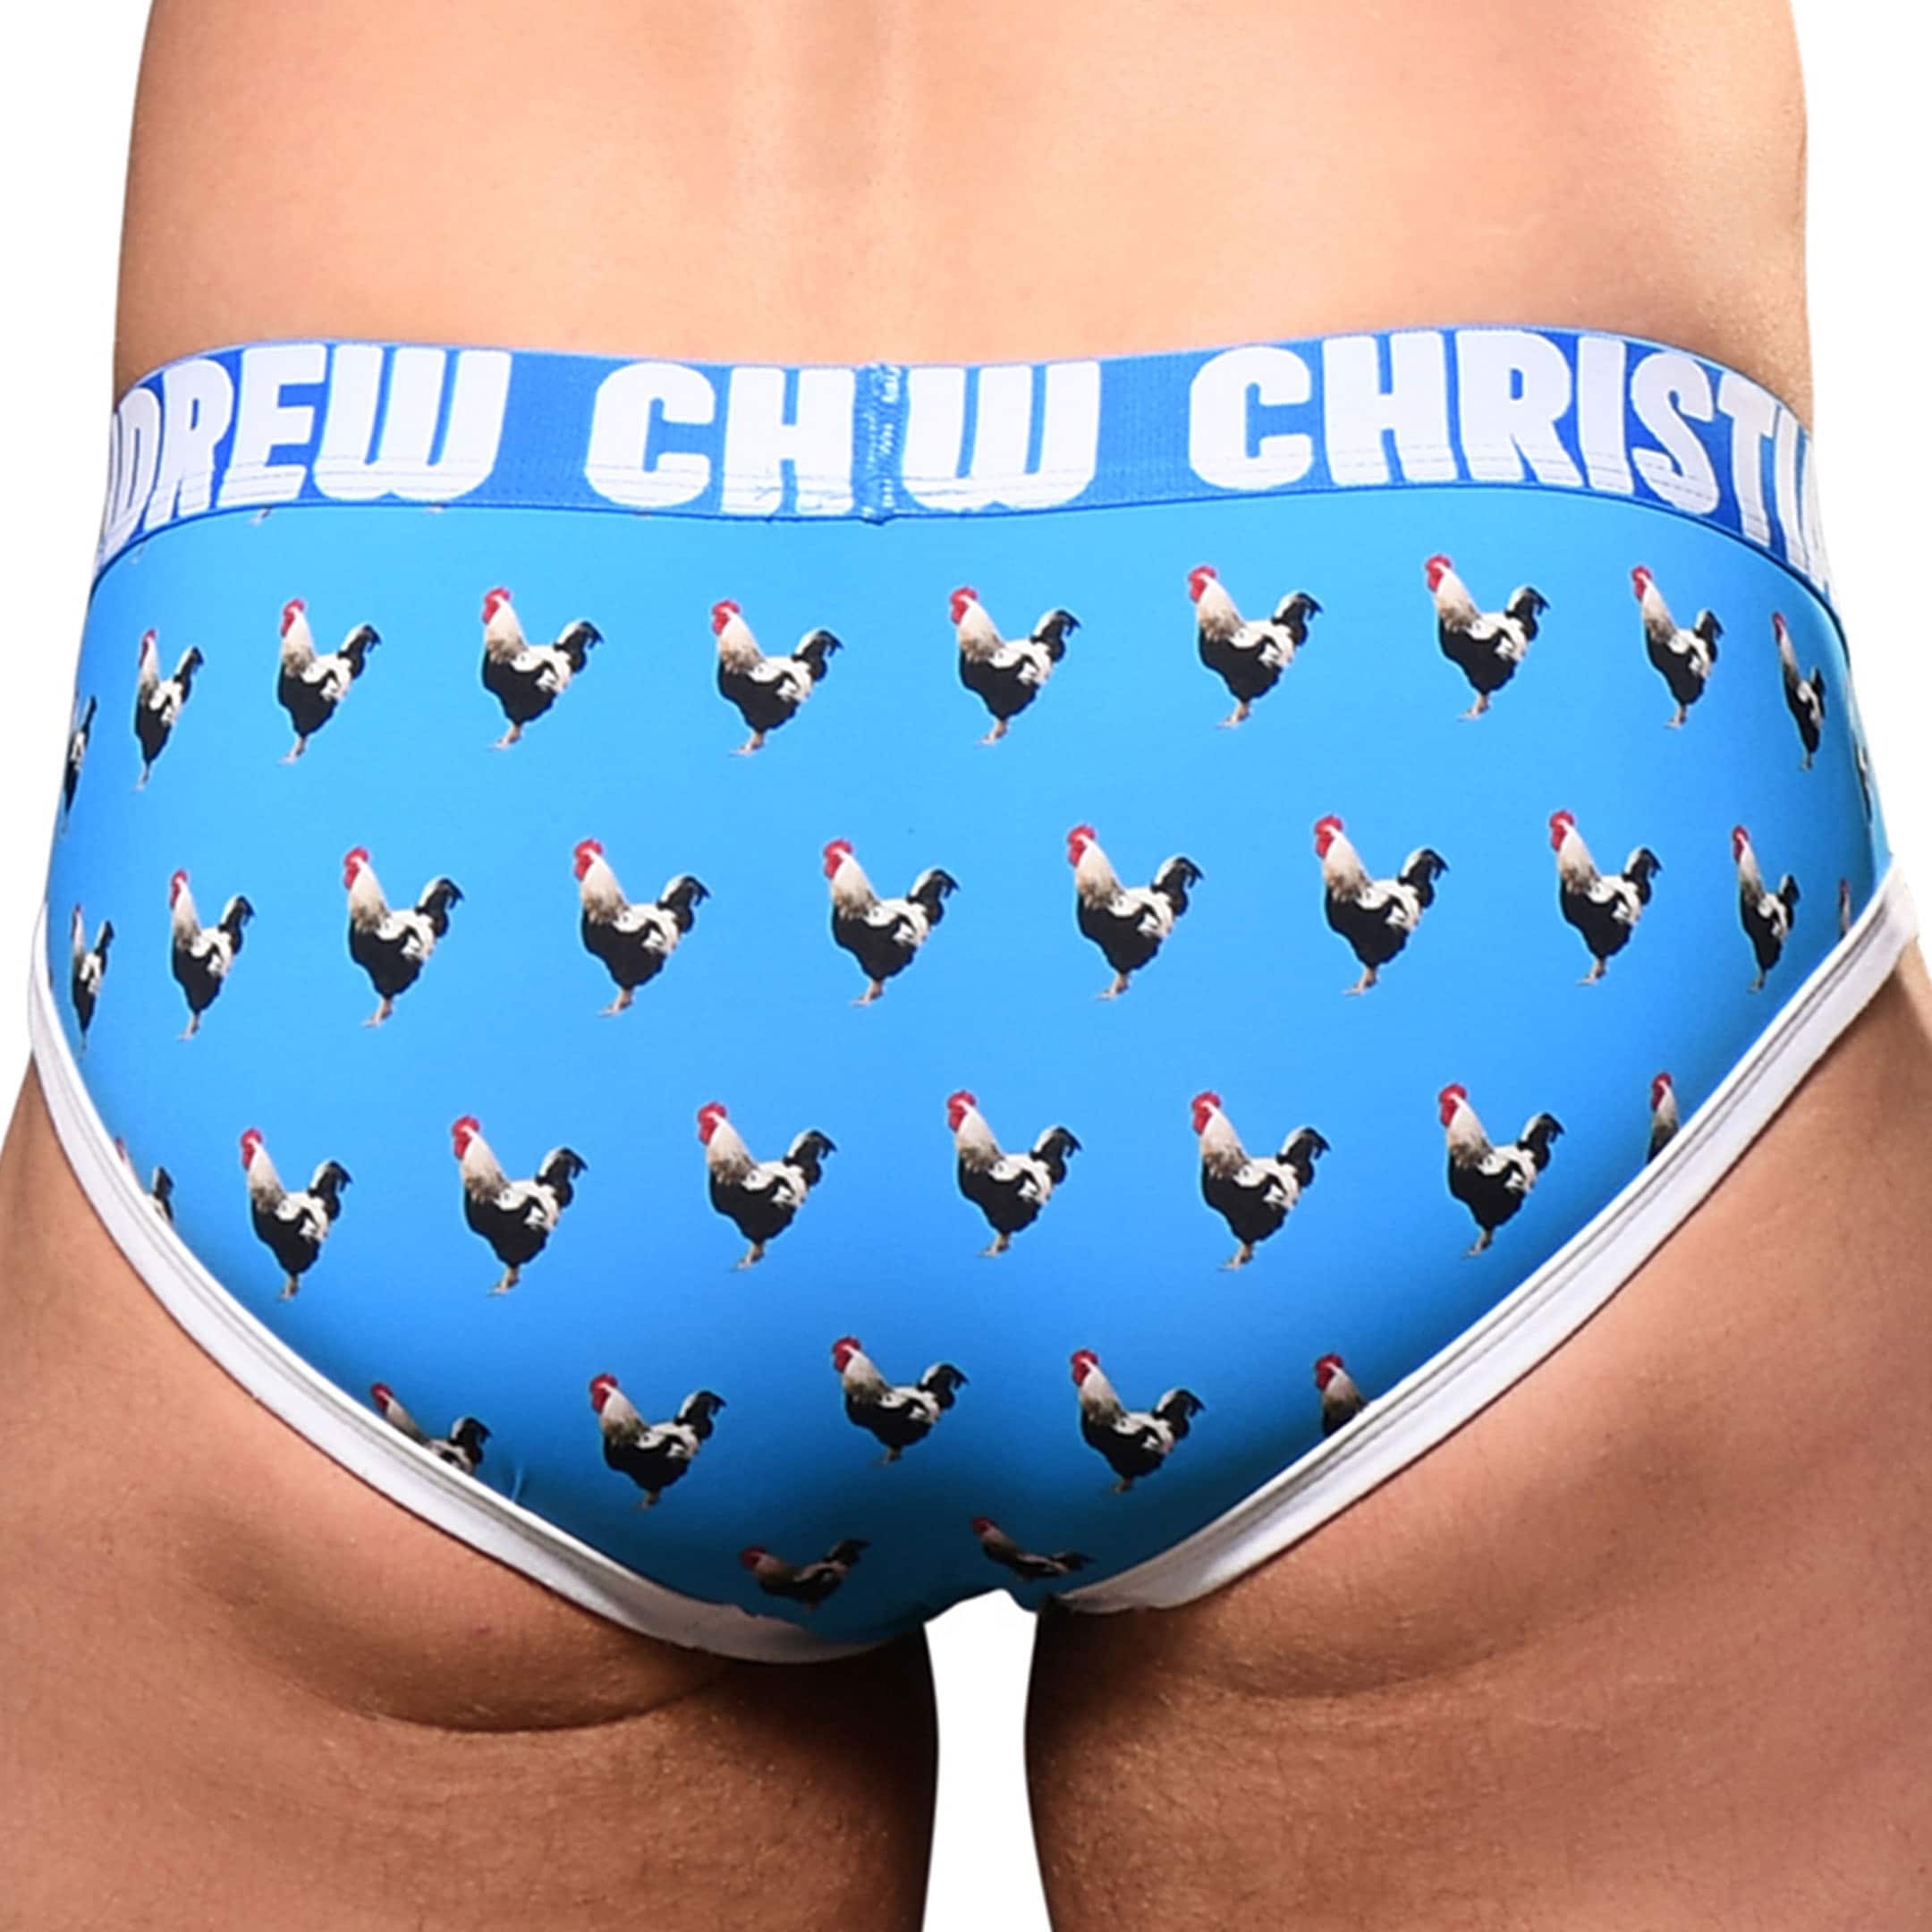 https://www.inderwear.com/159891/almost-naked-cock-briefs-blue-andrew-christian.jpg